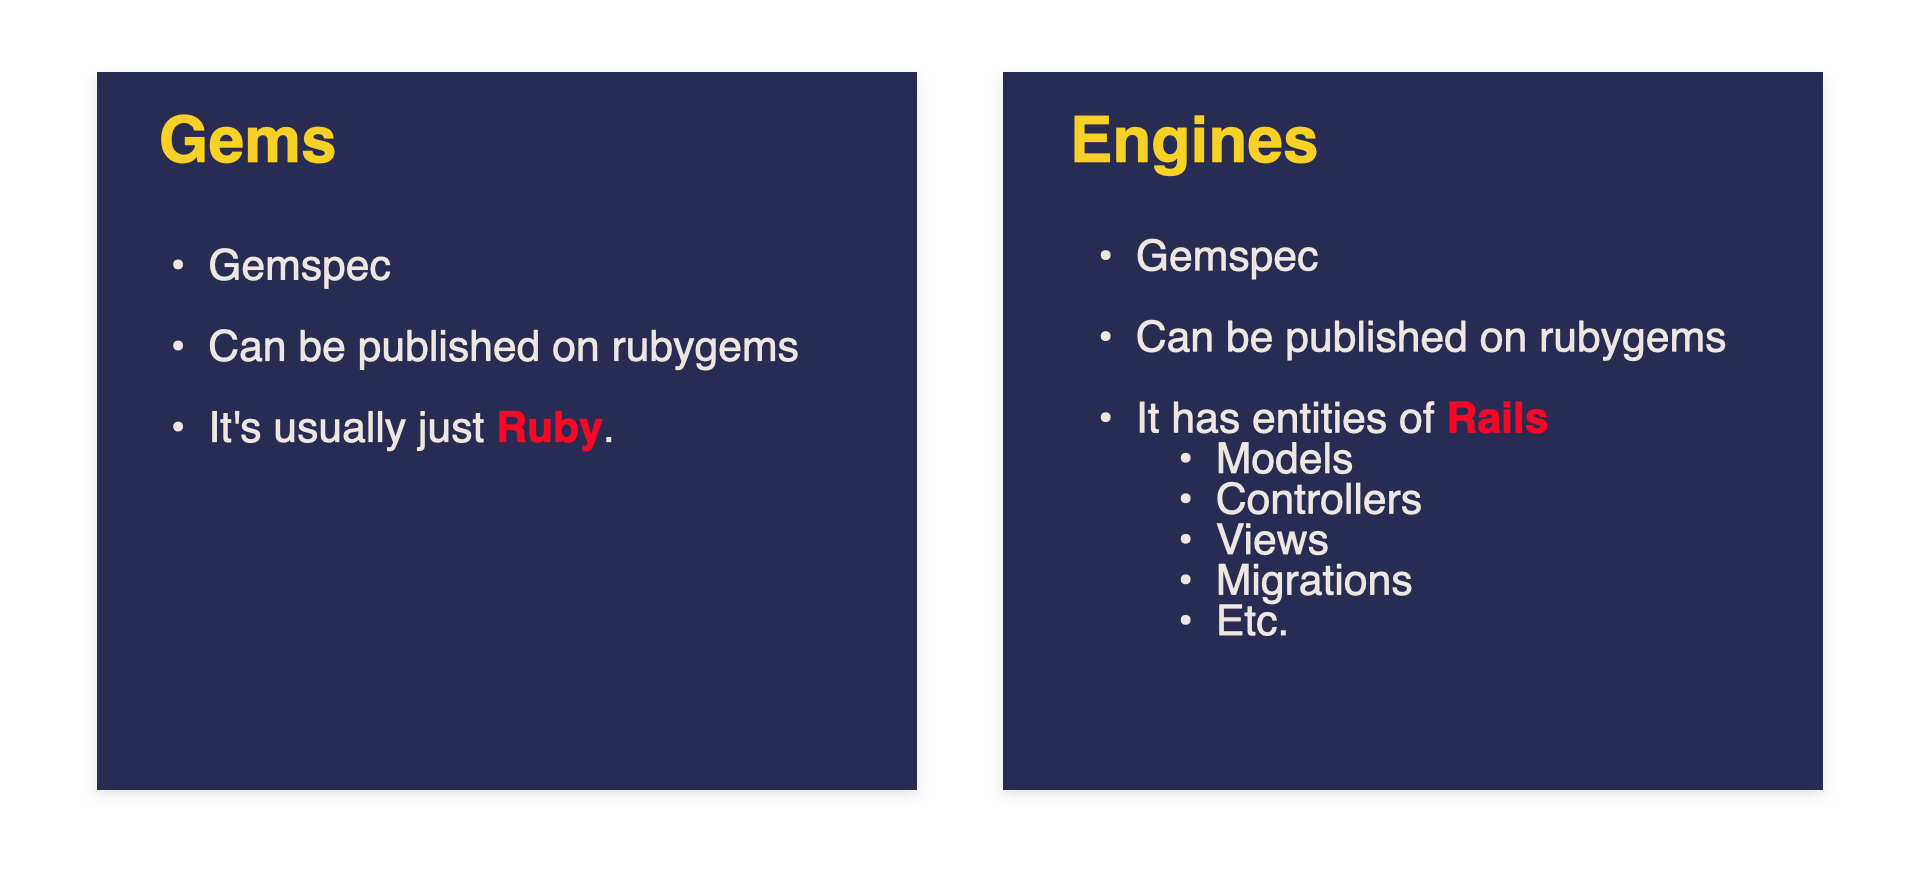 Engines for dummies